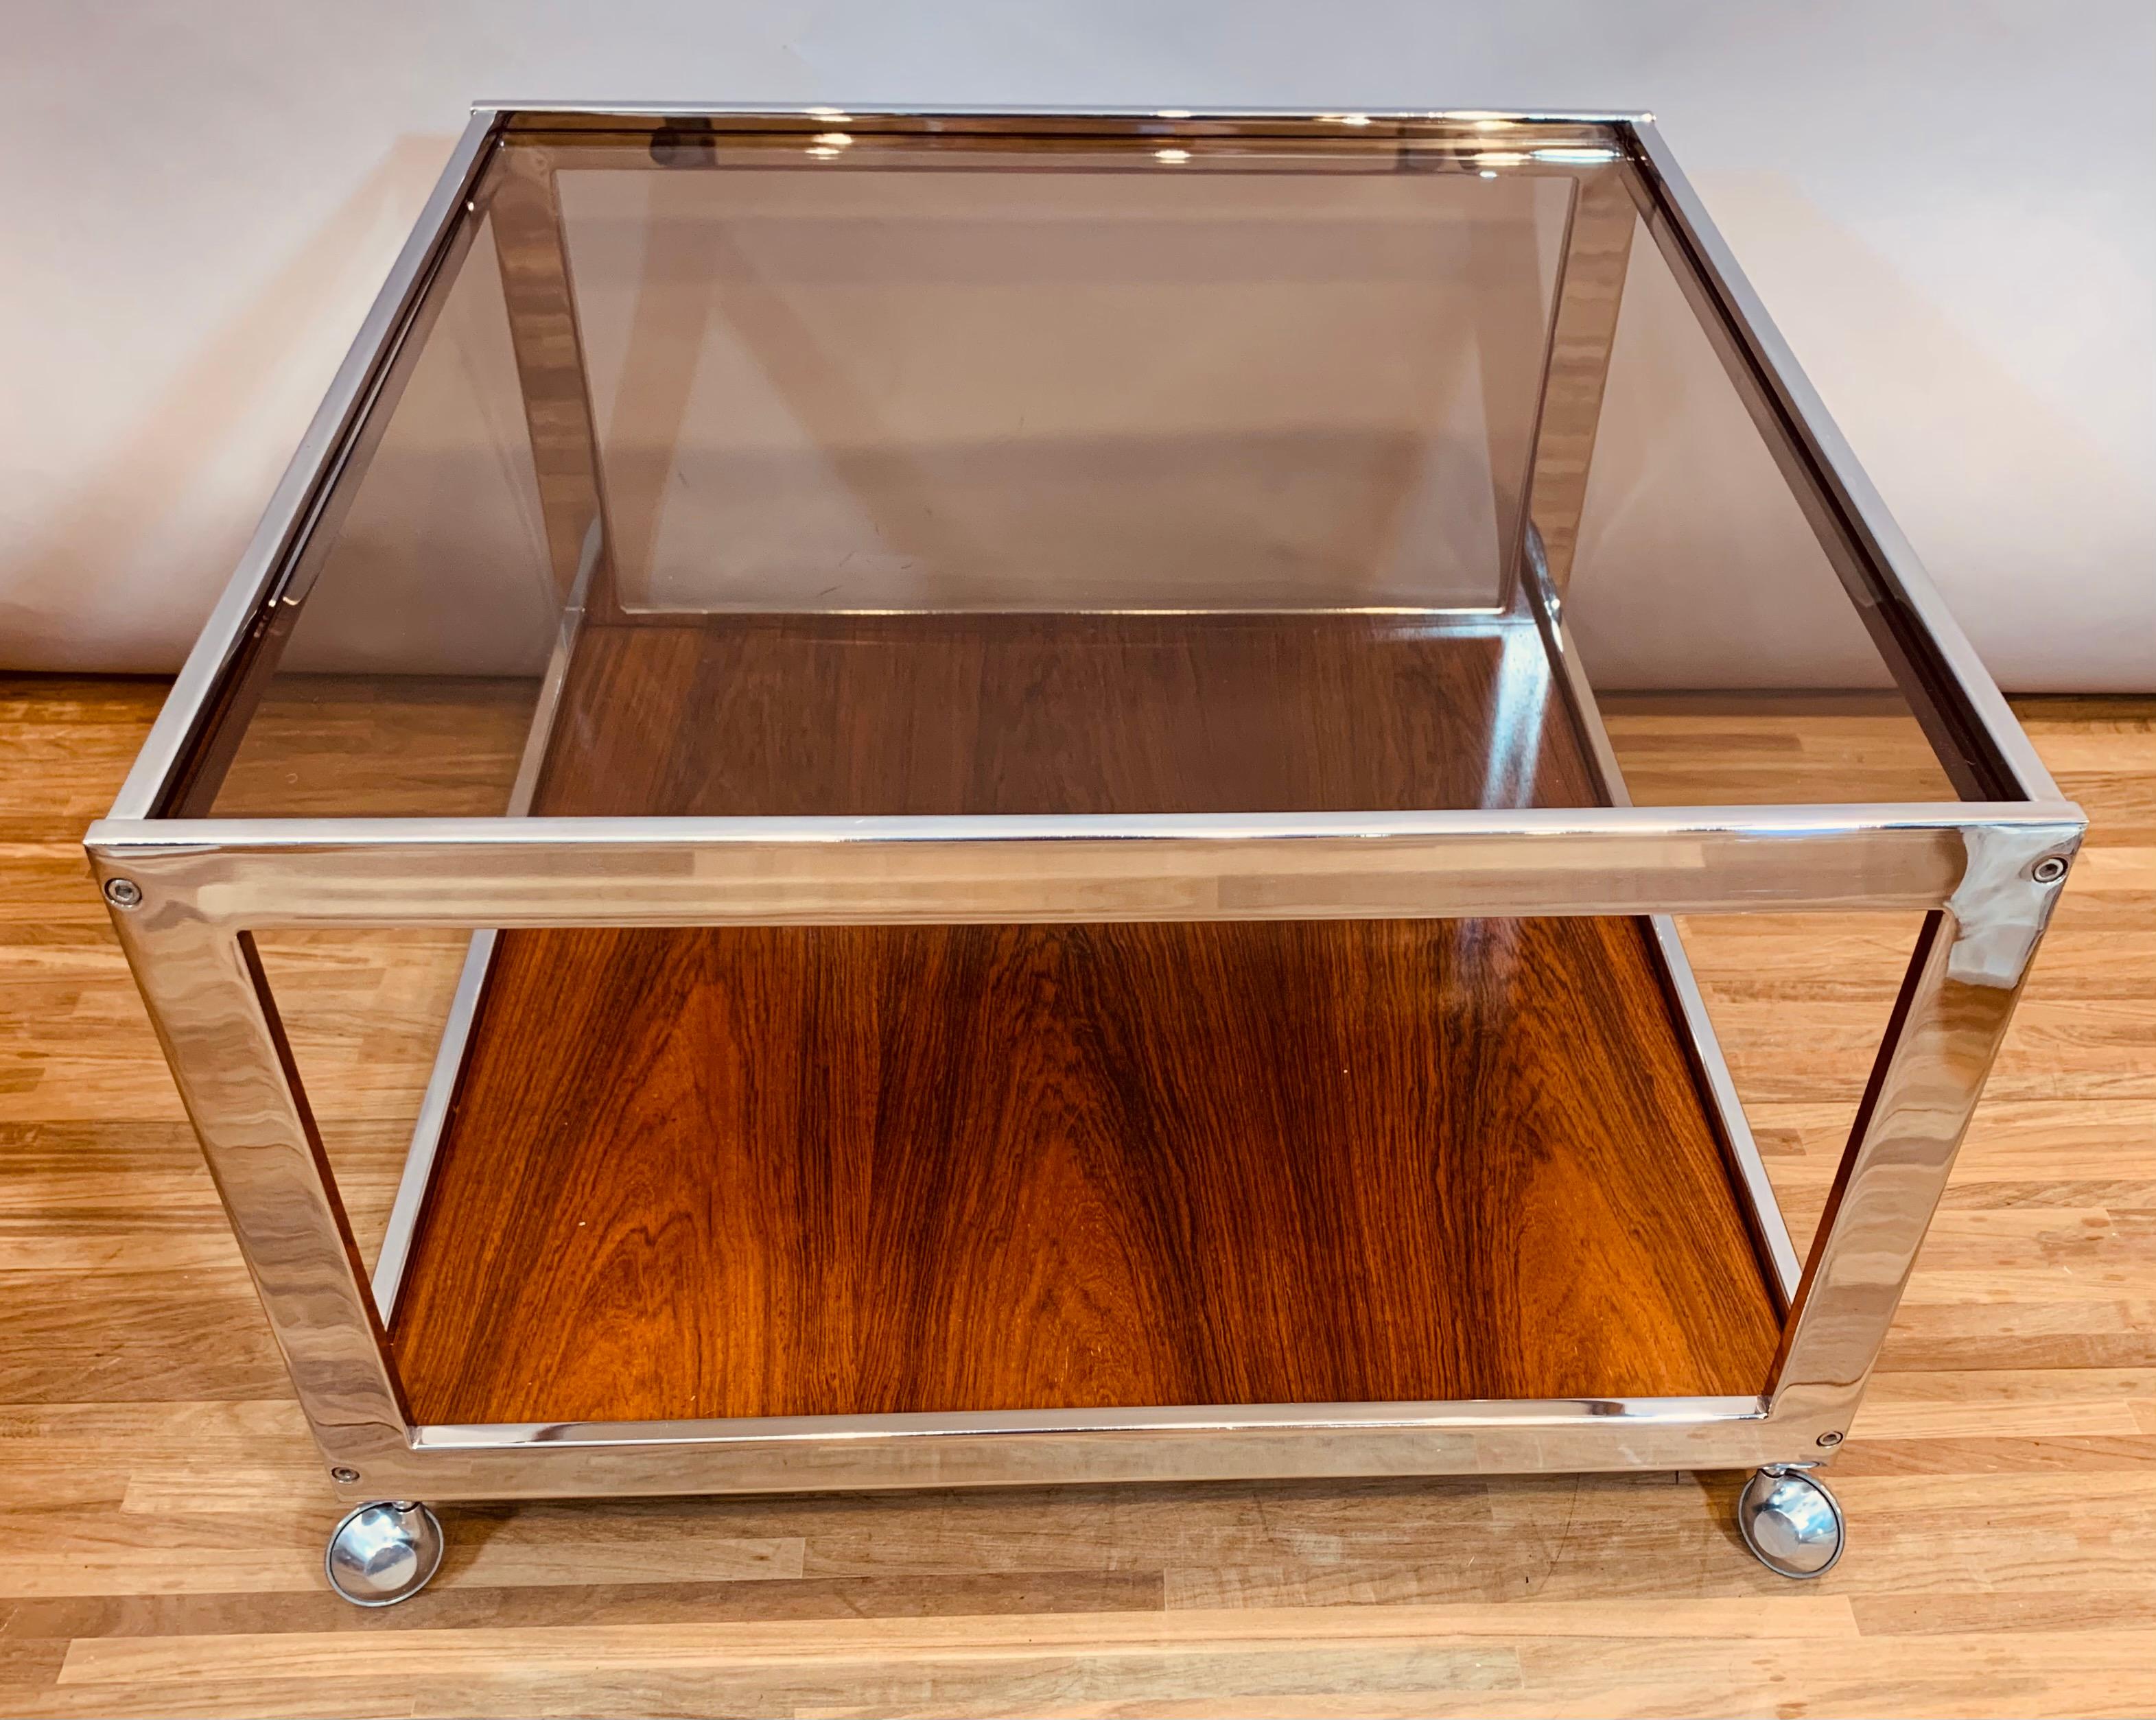 A vintage smoked glass, chromed metal and Rosewood veneer square coffee table. Designed in the 1970s by British designer Howard Miller for MDA - Miller Design Associates.

The square coffee table features features a thick smoked glass top which